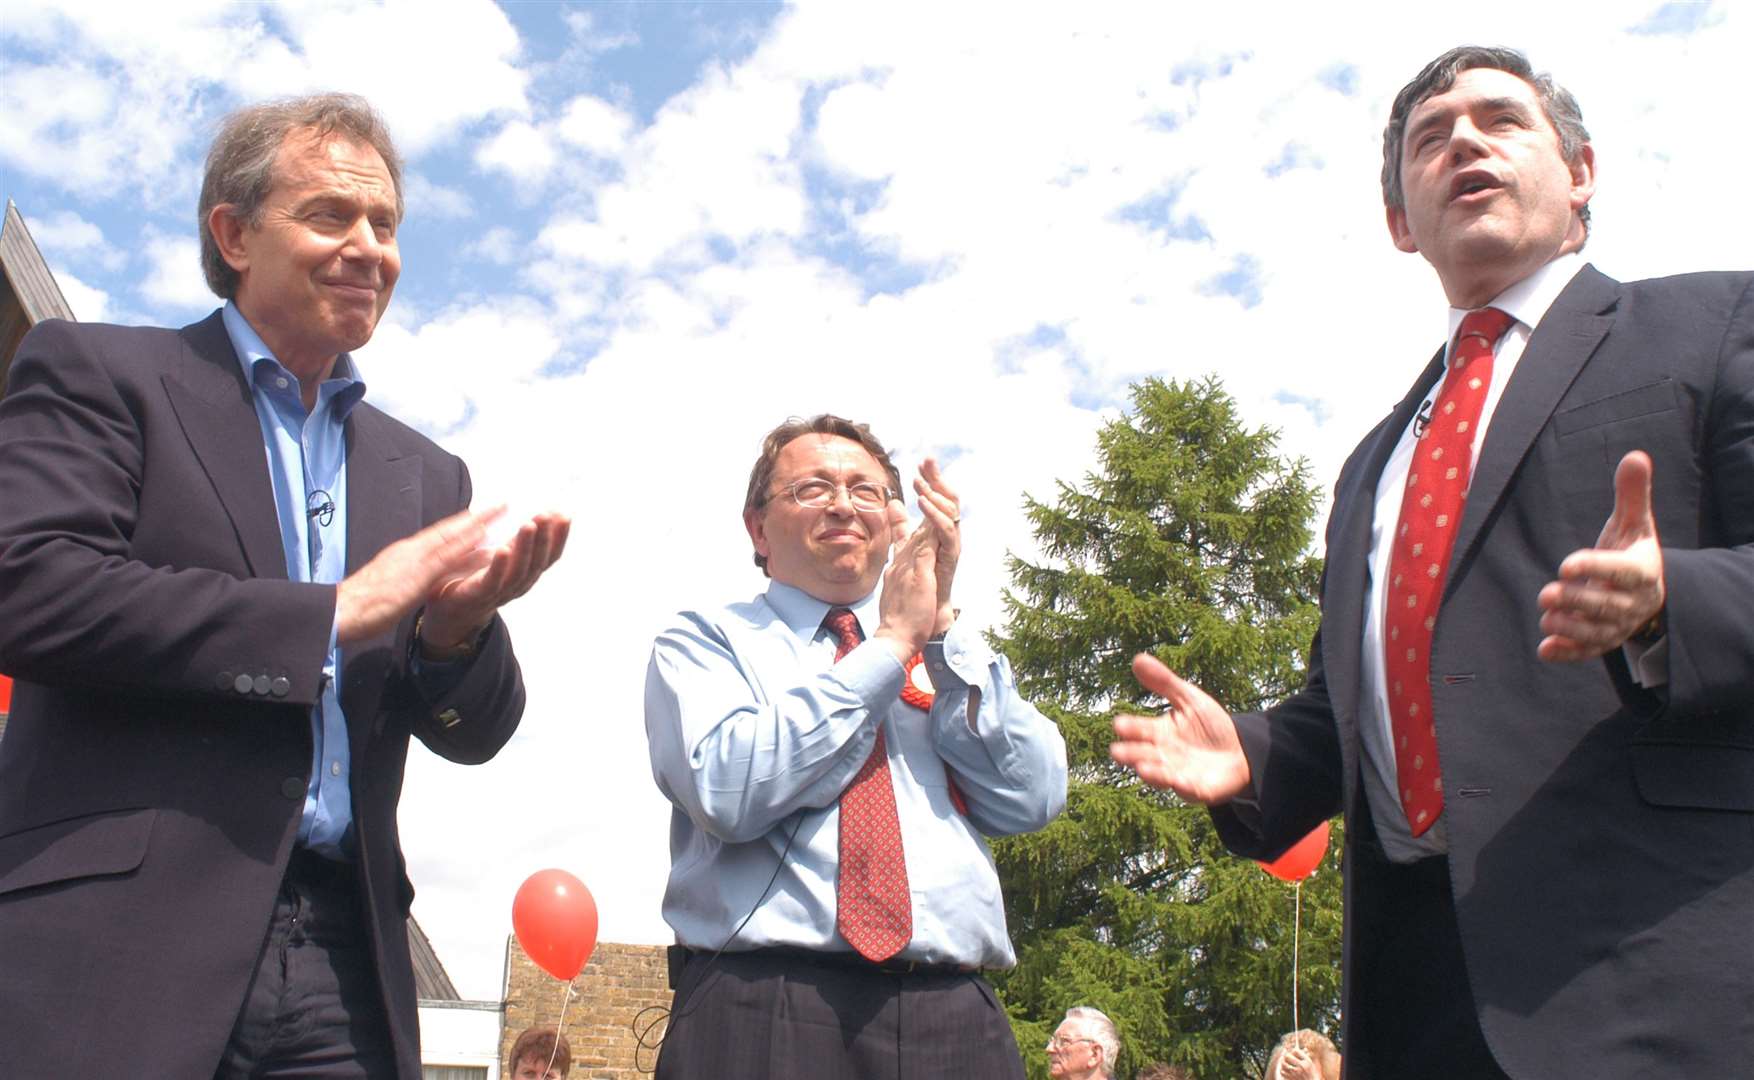 Then Gillingham MP Paul Clark on the campaign trail with PM Tony Blair and Gordon Brown in May 2005 in Twydall